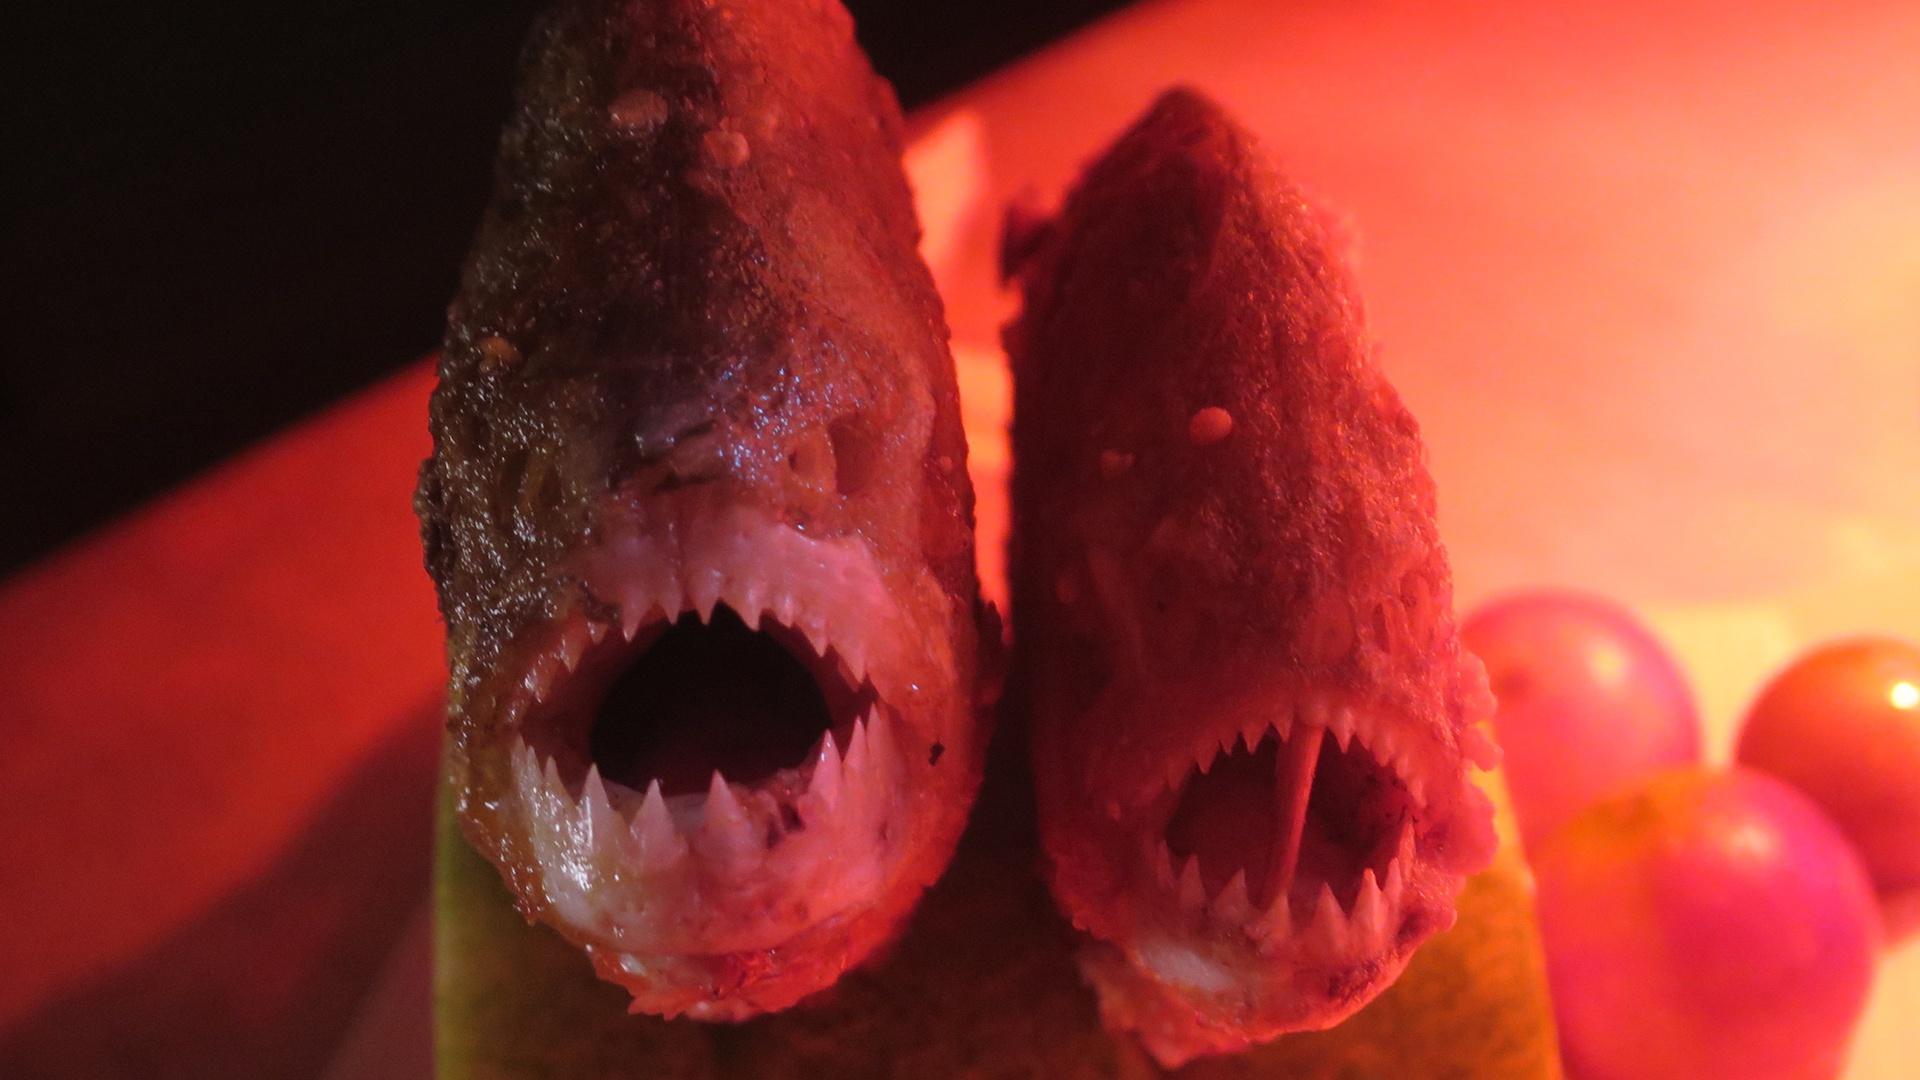 Close-up of two piranhas in red lighting.